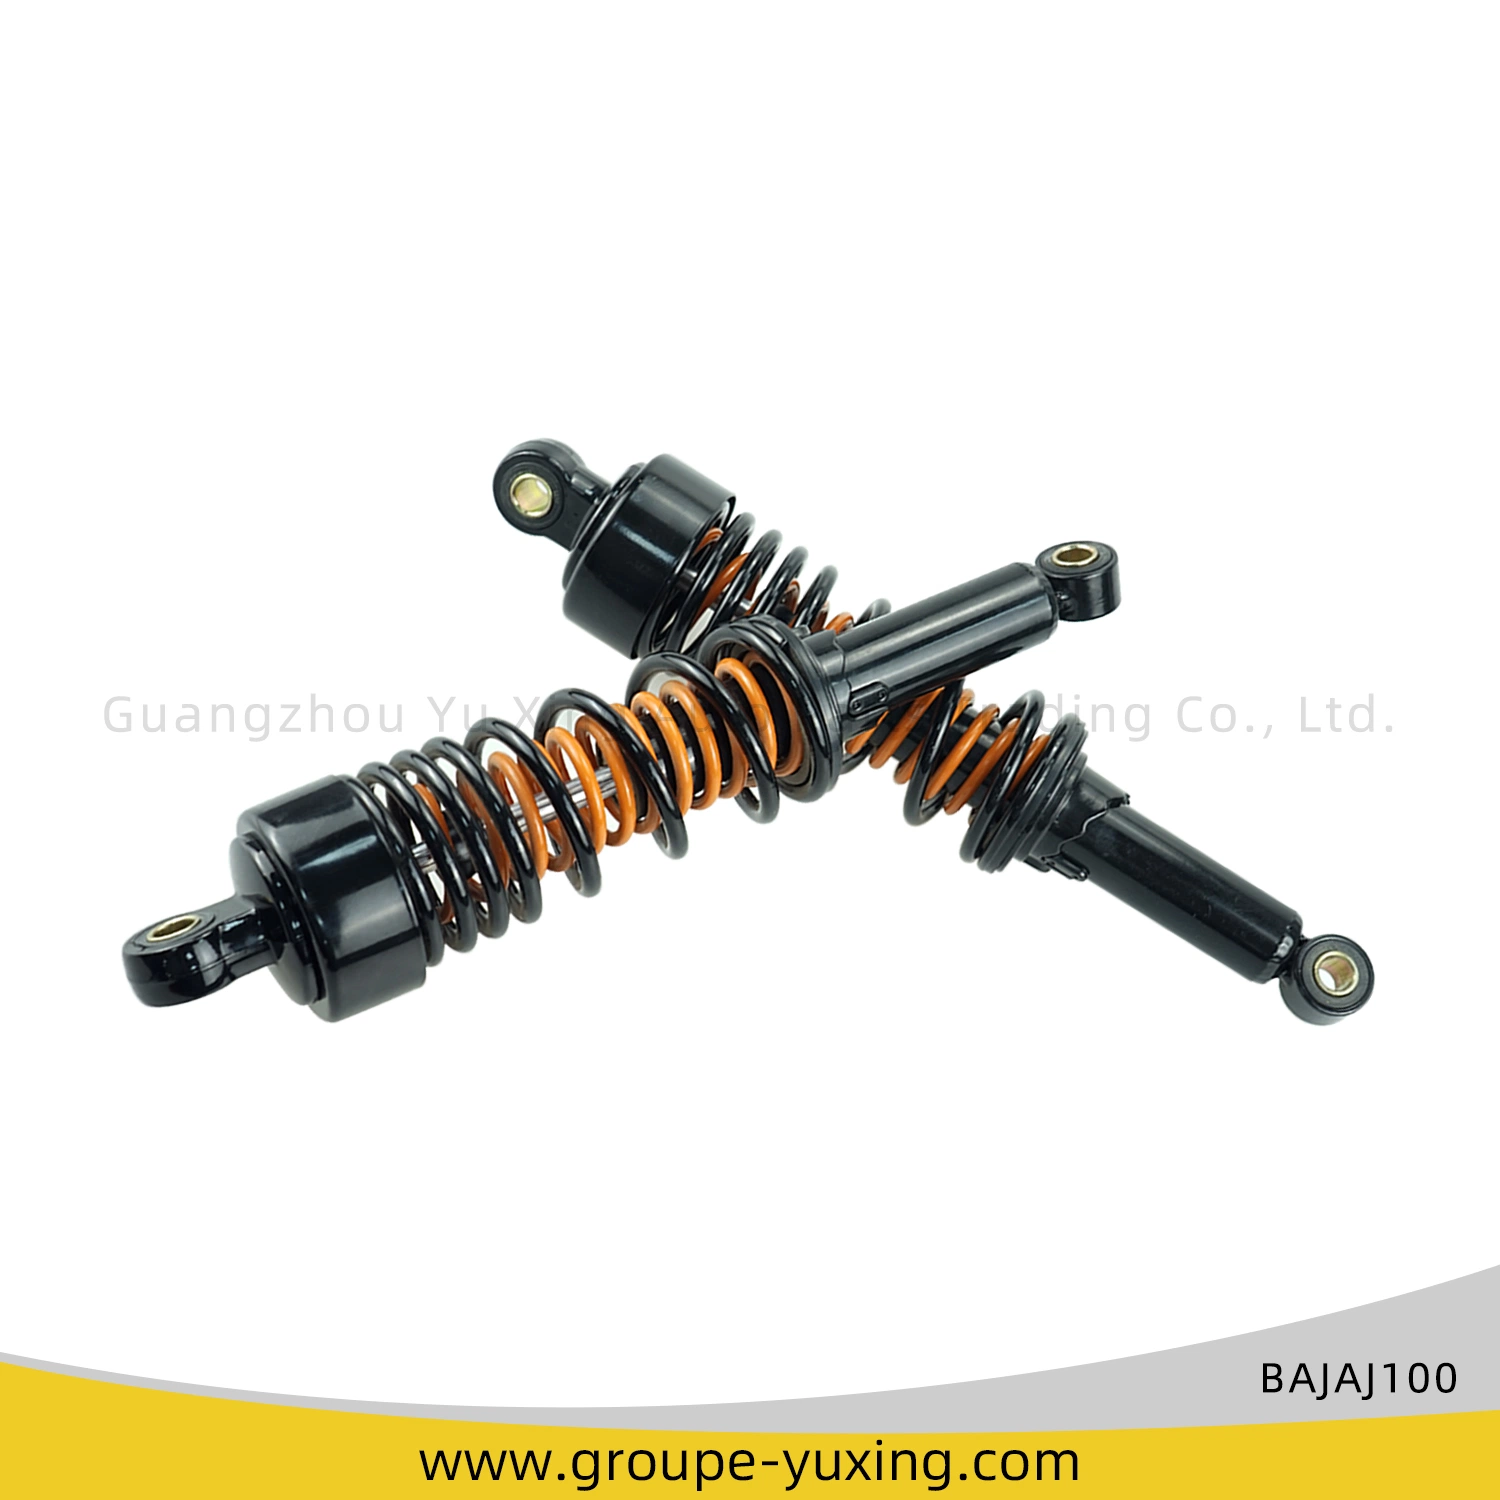 Rear Shock Absorber of Motorcycle Parts